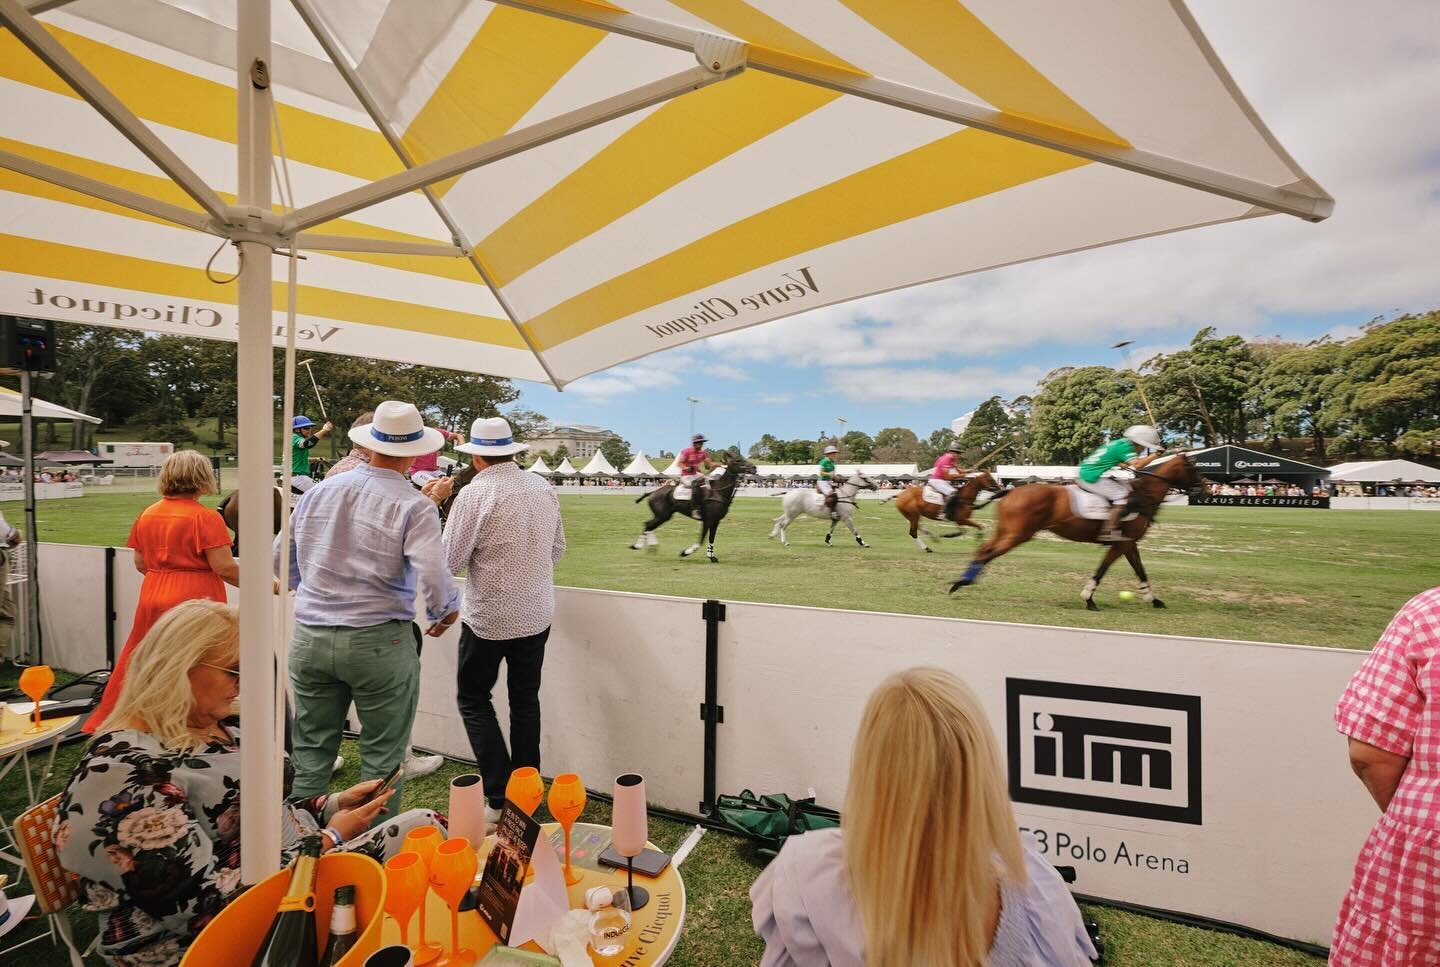 For the first time in 2,009 years the Polo fields have been redesigned to bring you closer to the action, we thank the ITM team for partnering with us to build the F3 Polo Arena